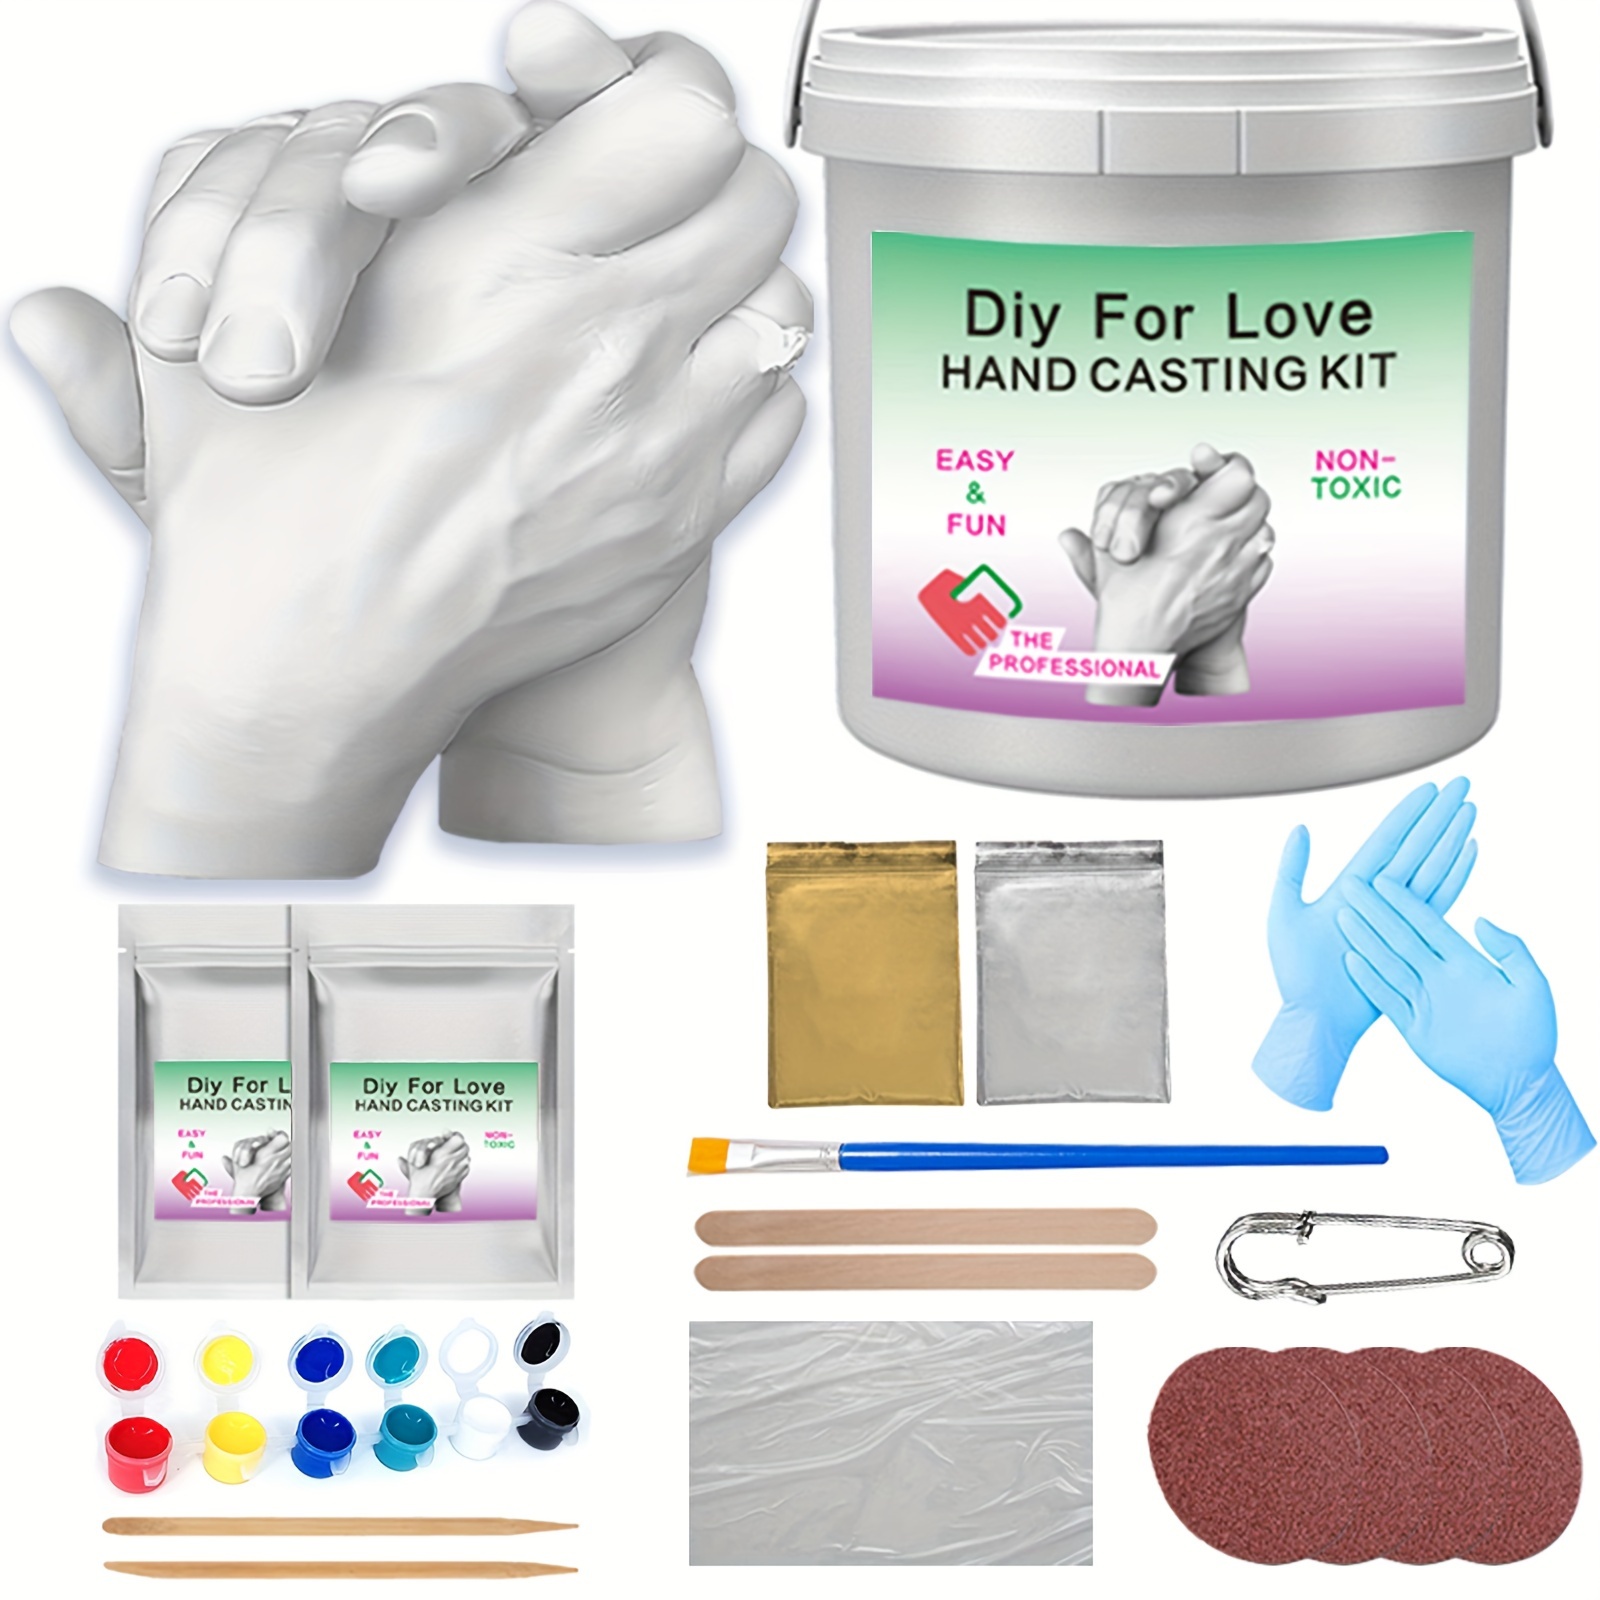 Hand Casting Kit Couples & Hand Molding Kit for Adults, Keepsake Hand Mold Kit Couples for Holiday Activities, Wedding, Couples Gifts - 3 Paint